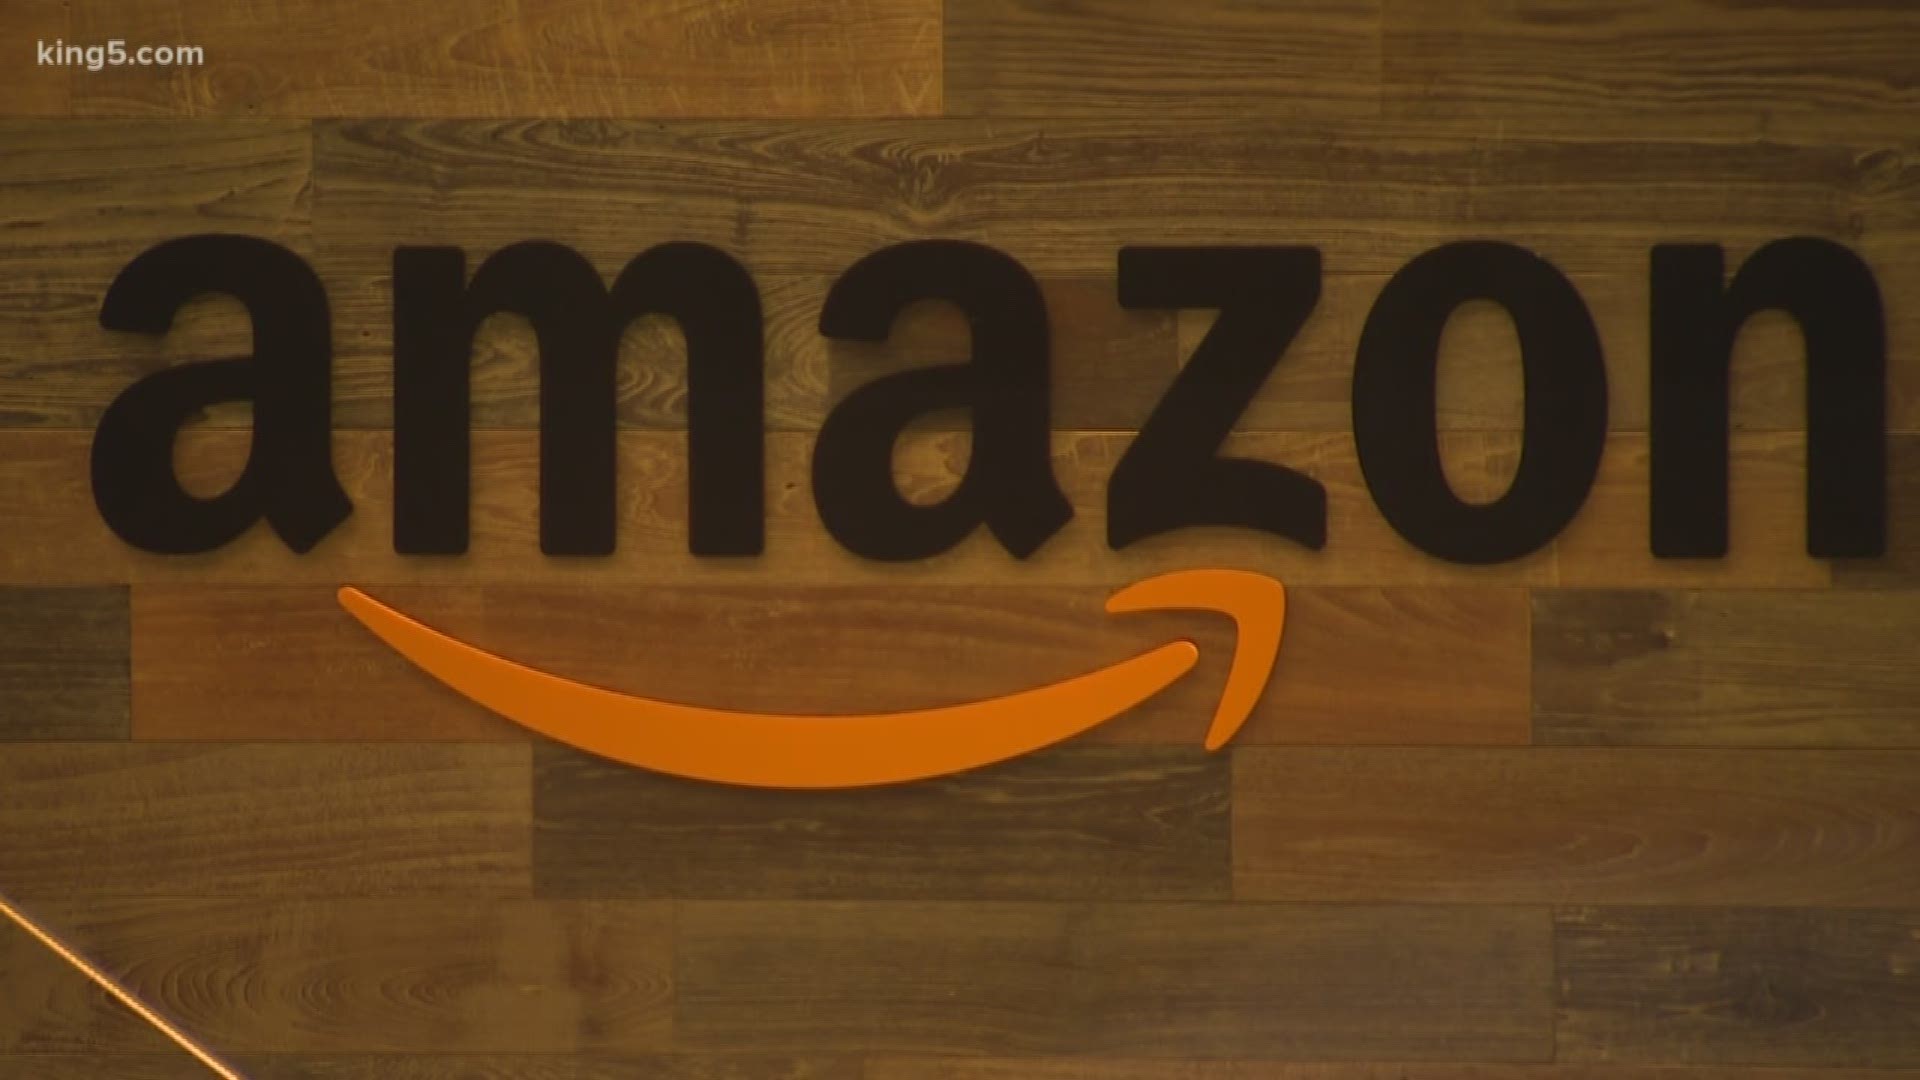 An employee at Amazon's South Lake Union headquarters tested positive for coronavirus. They have been quarantined. Amazon has reached out to those in close contact.